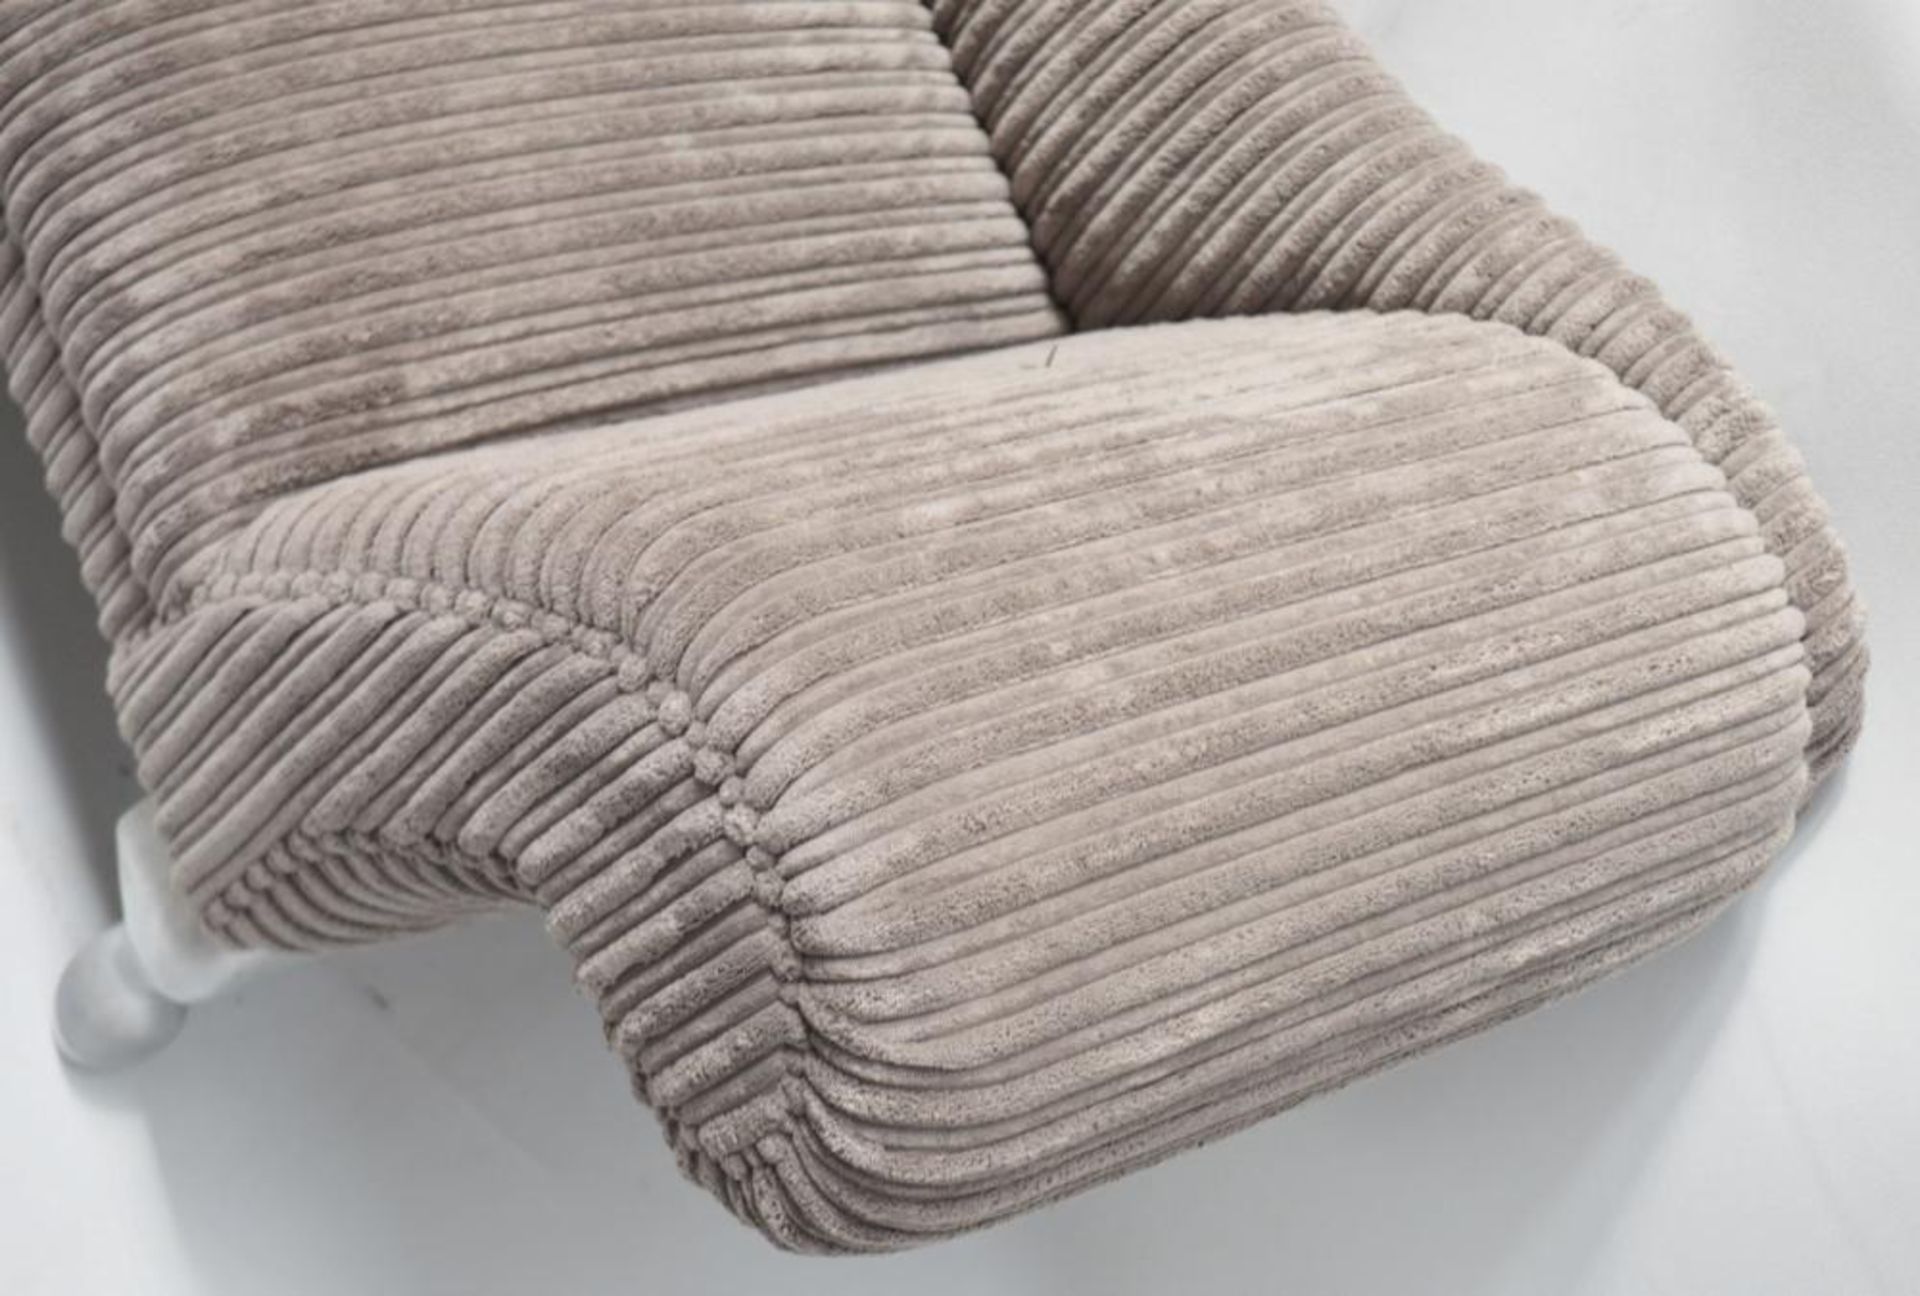 1 x Chais Lounge In A Soft Mocha Fabric With Silver Painted Legs - Dimensions: H80 x W177 x D50cm, S - Image 4 of 6